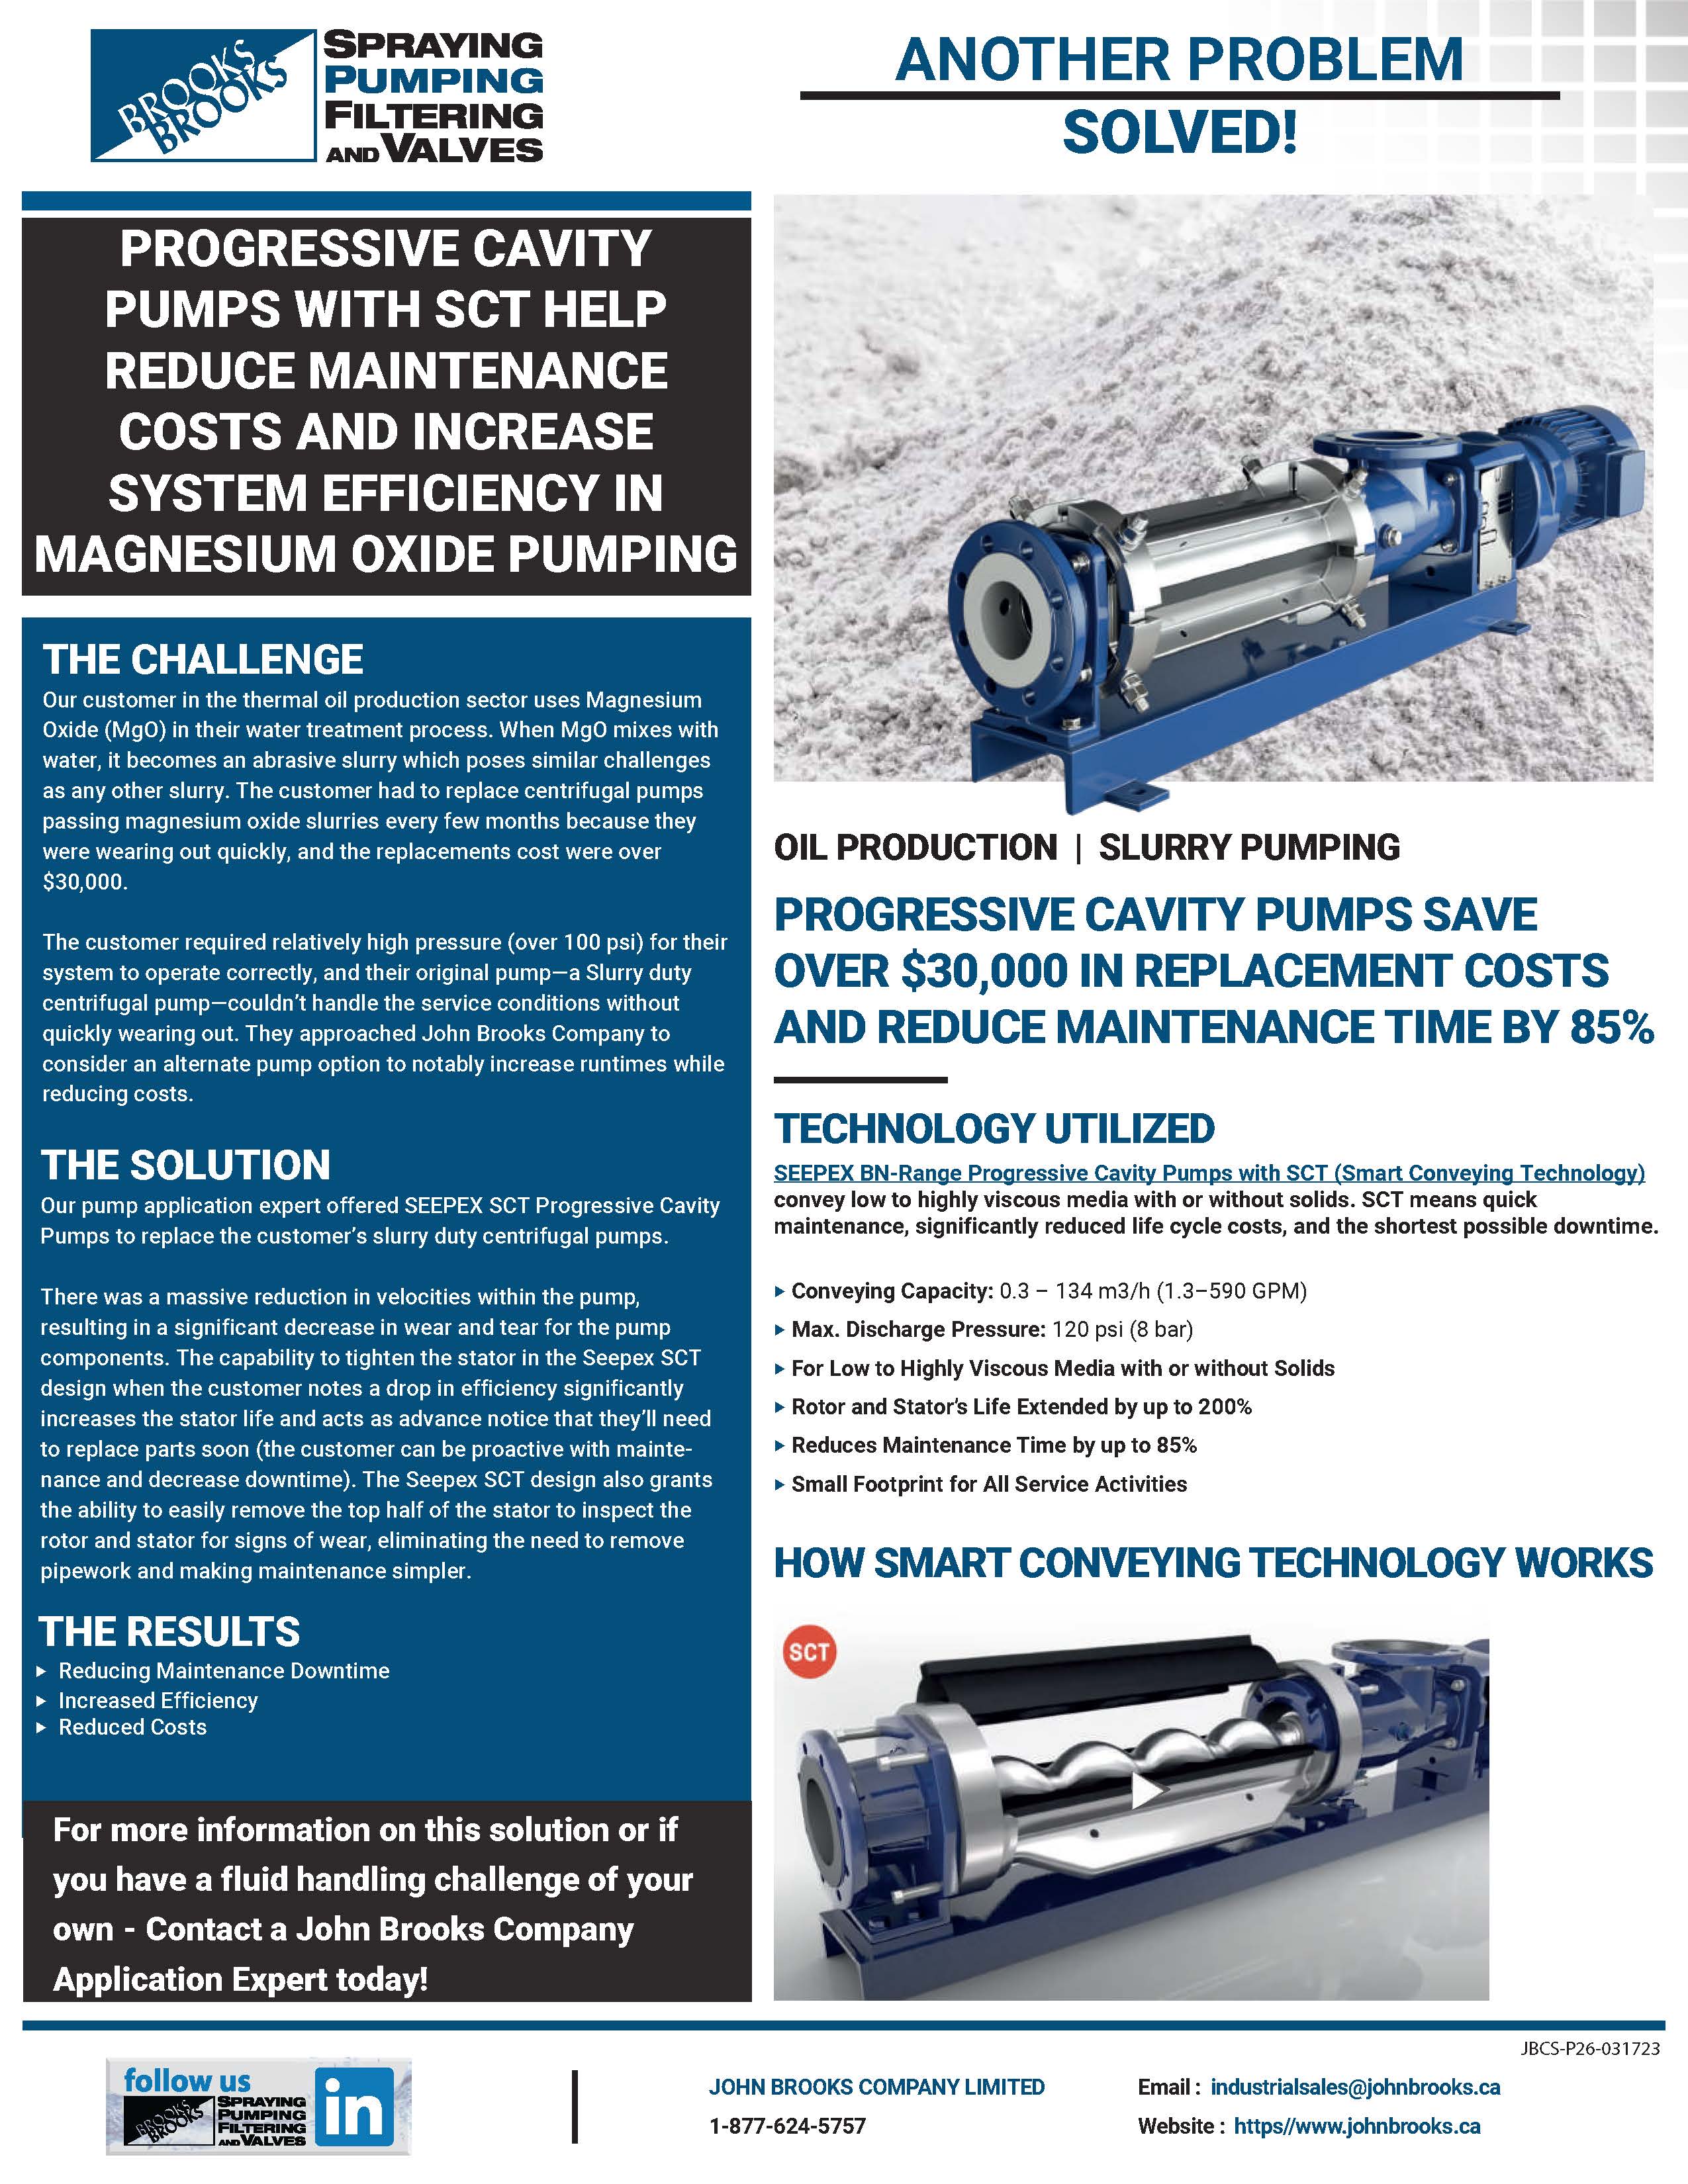 Progressive Cavity Pumps Help Reduce Maintenance Cost and Downtime and Increase System Efficiency in Magnesium Oxide Pumping